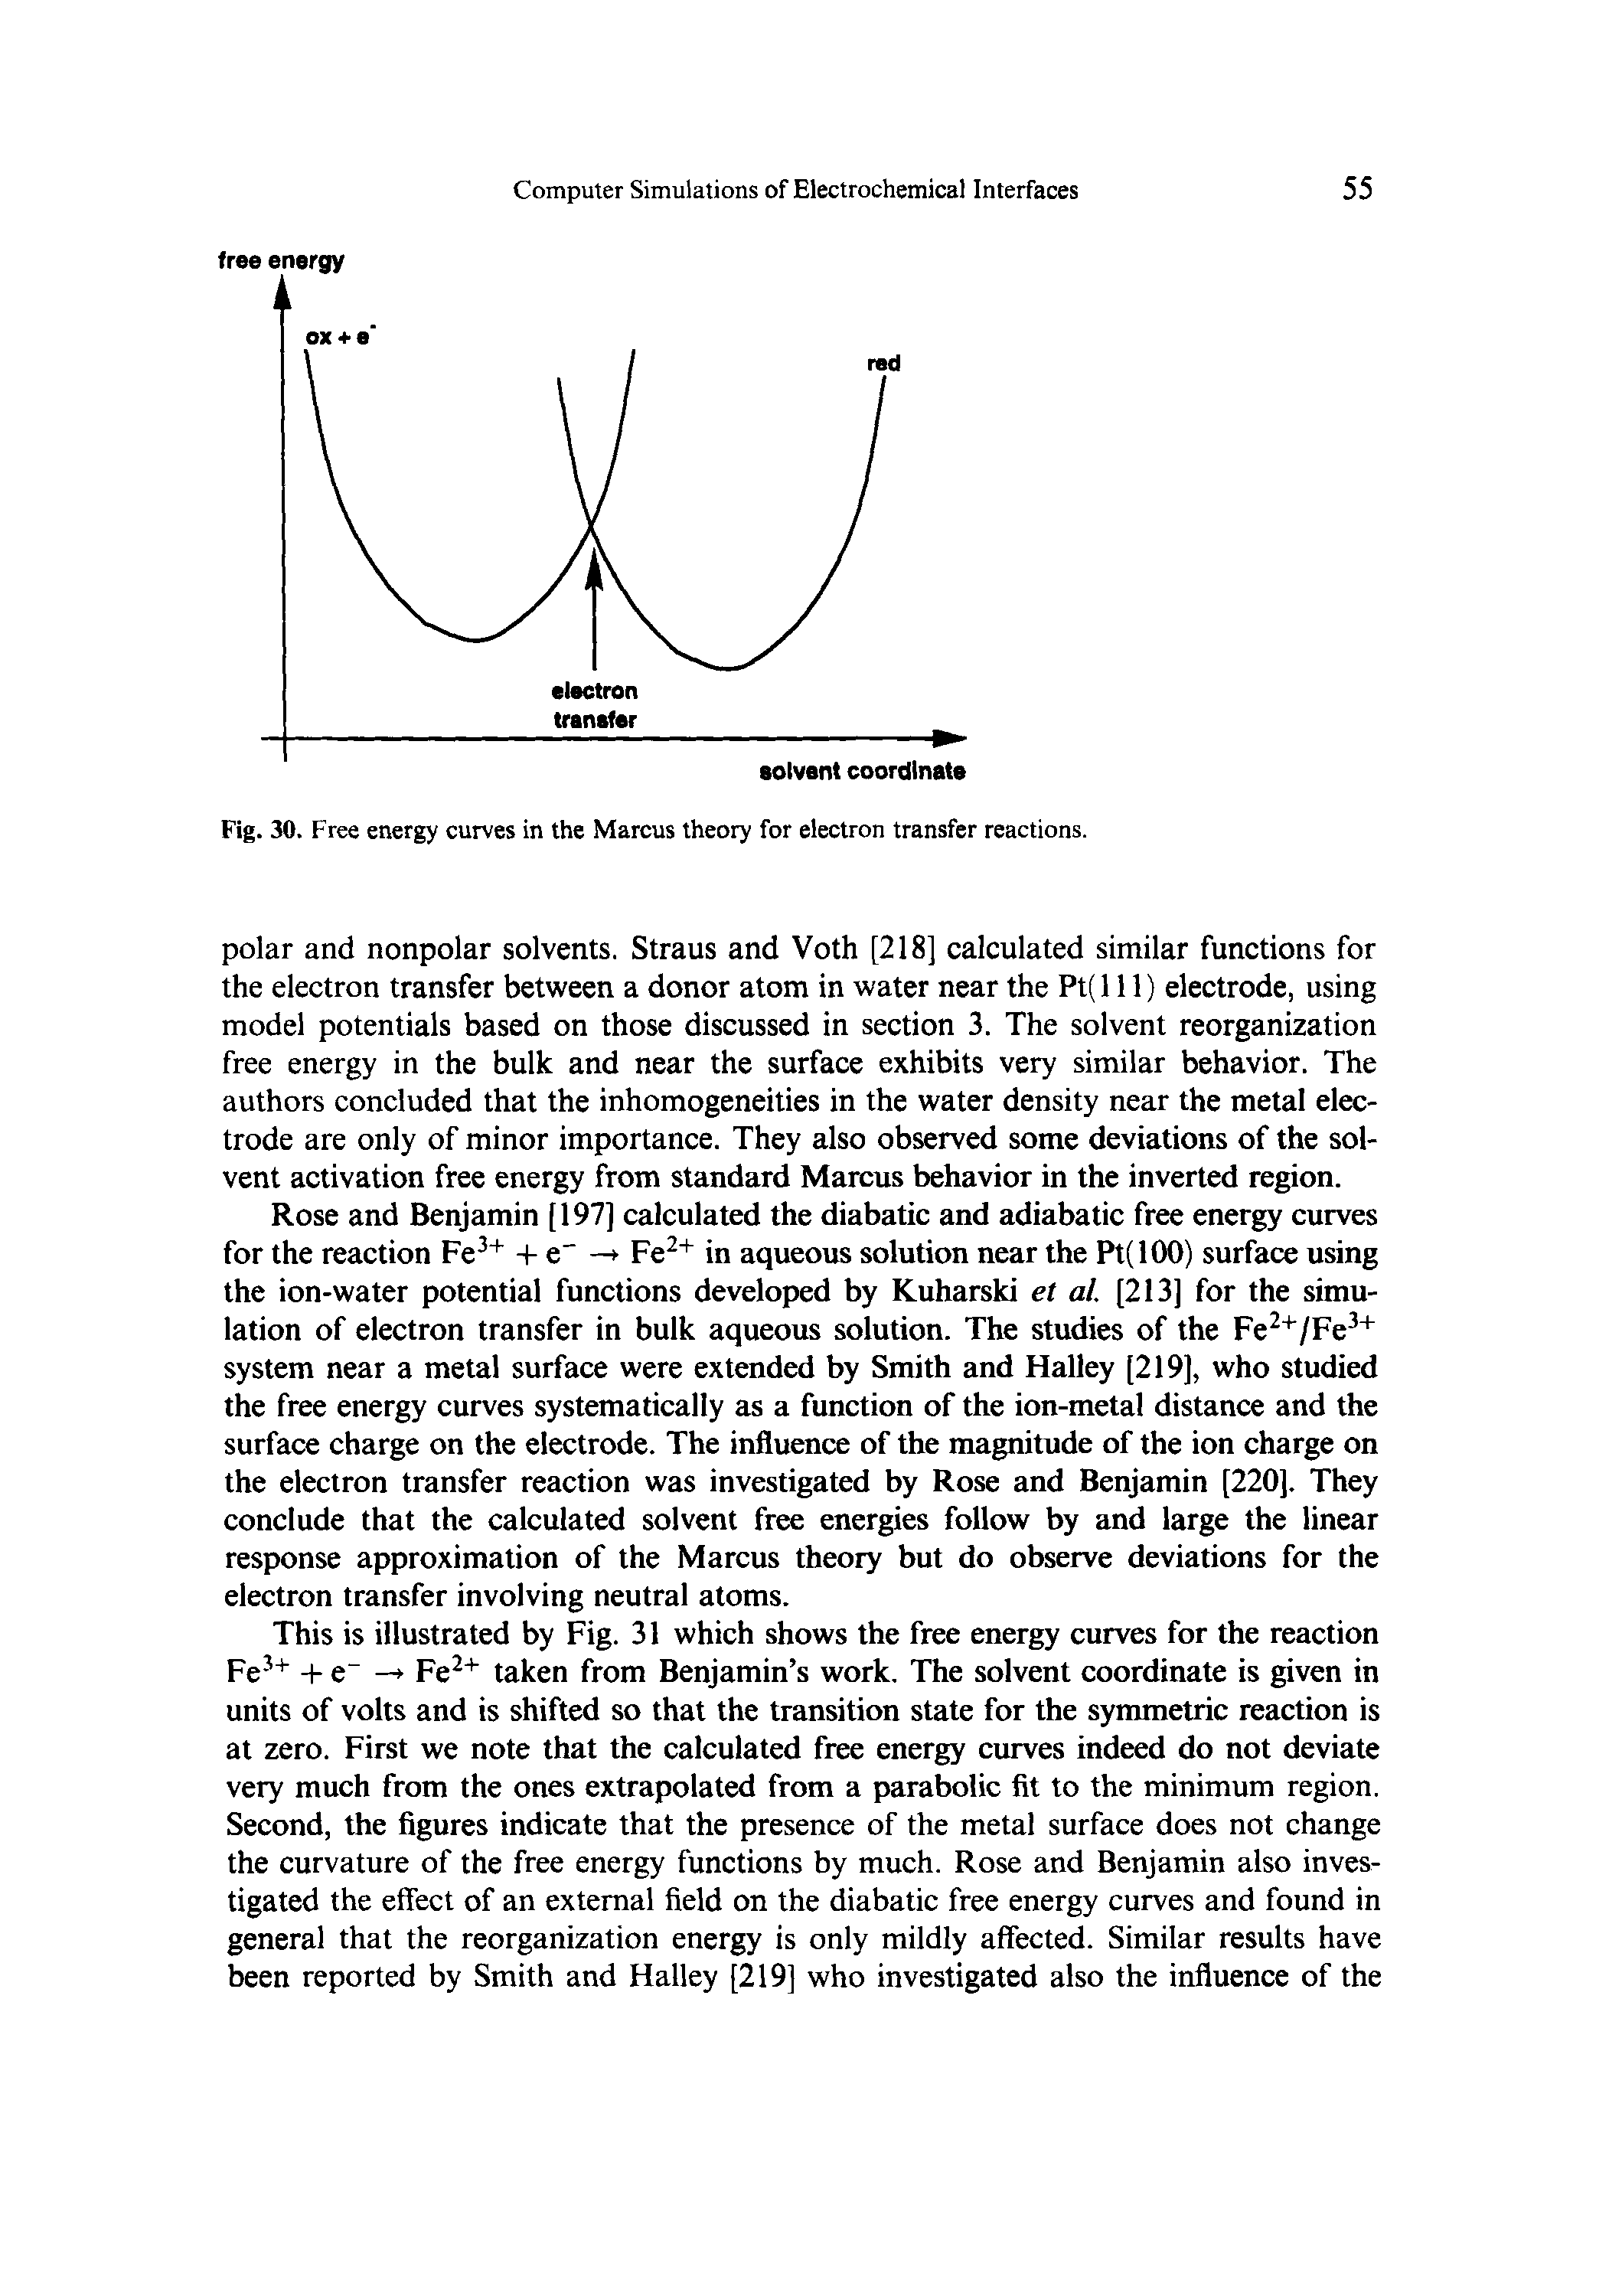 Fig. 30. Free energy curves in the Marcus theory for electron transfer reactions.